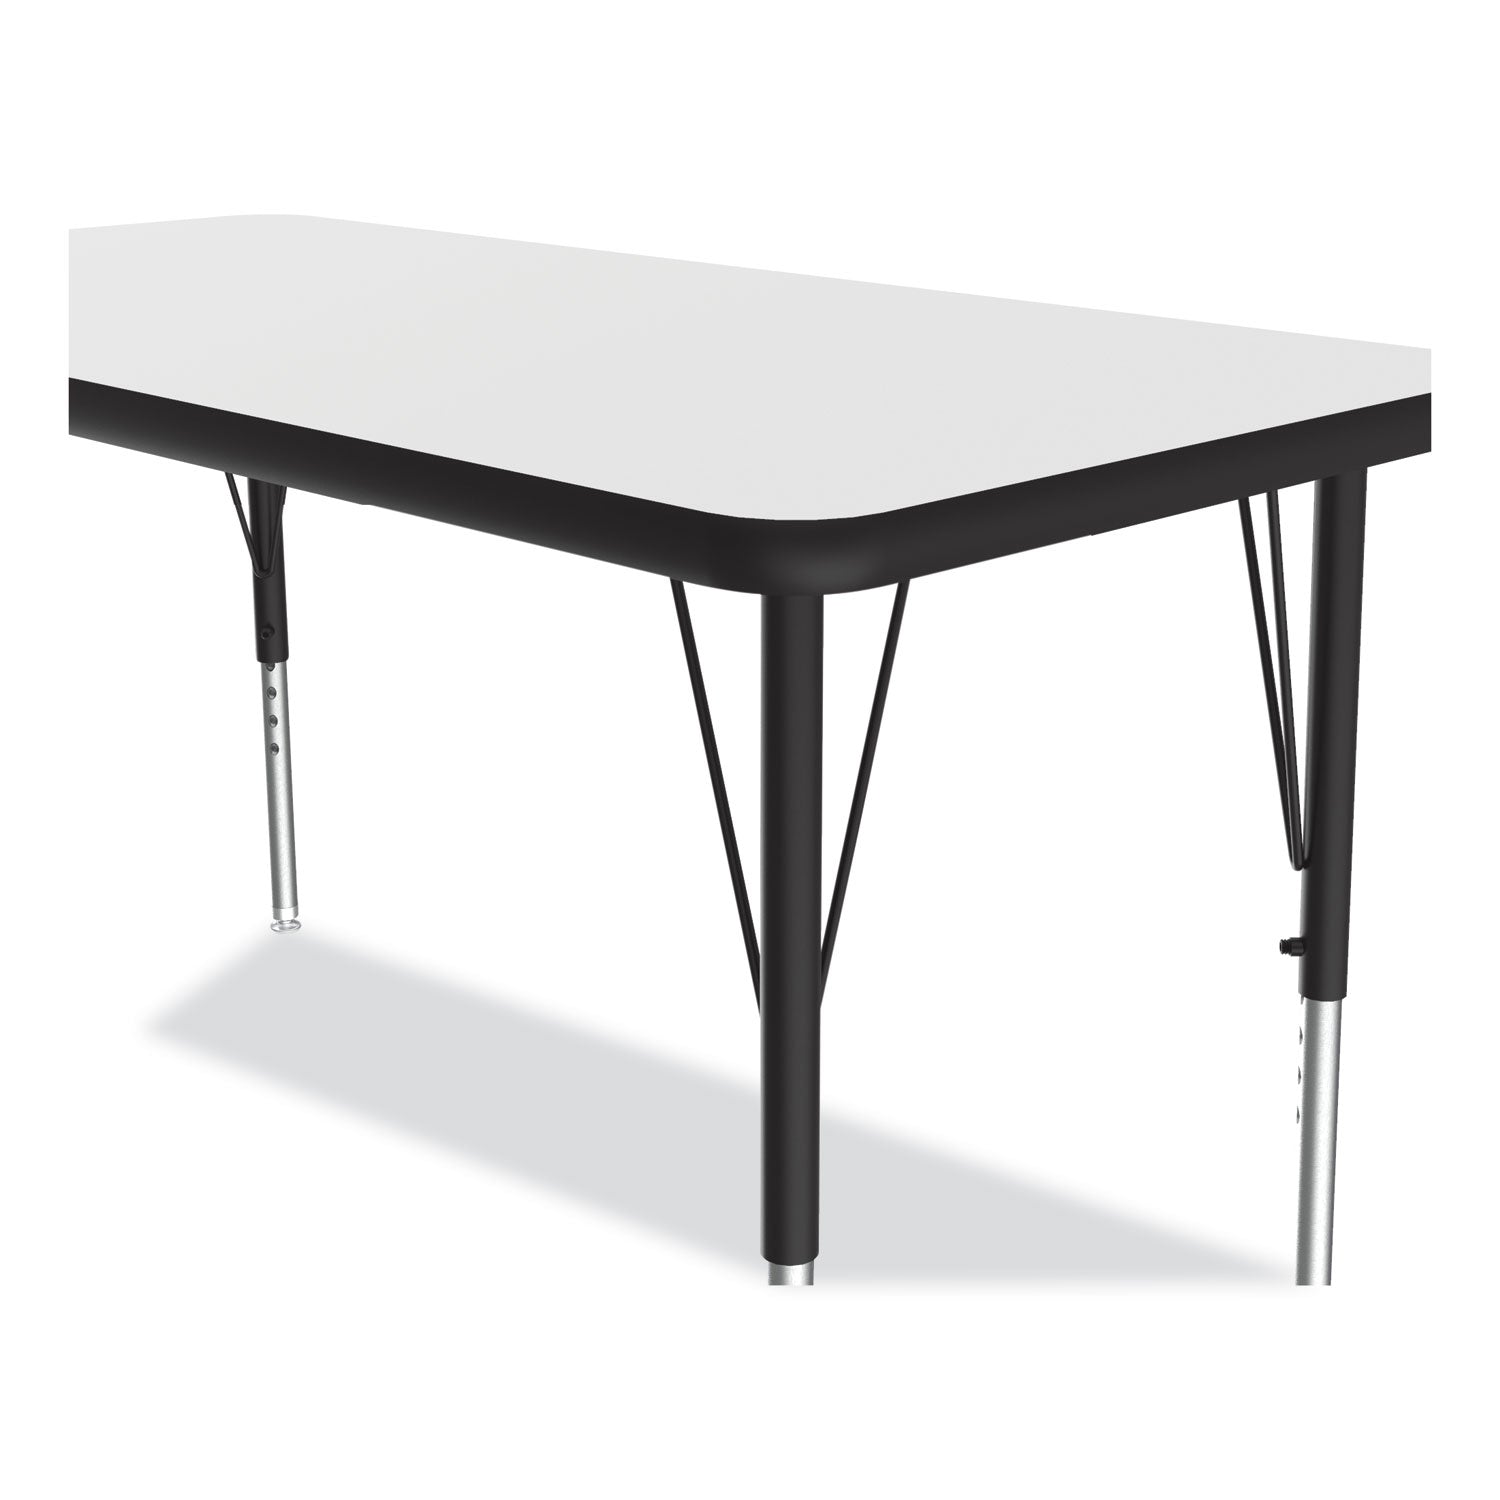 markerboard-activity-tables-rectangular-60-x-24-x-19-to-29-white-top-black-legs-4-pallet-ships-in-4-6-business-days_crl2460de80954p - 8